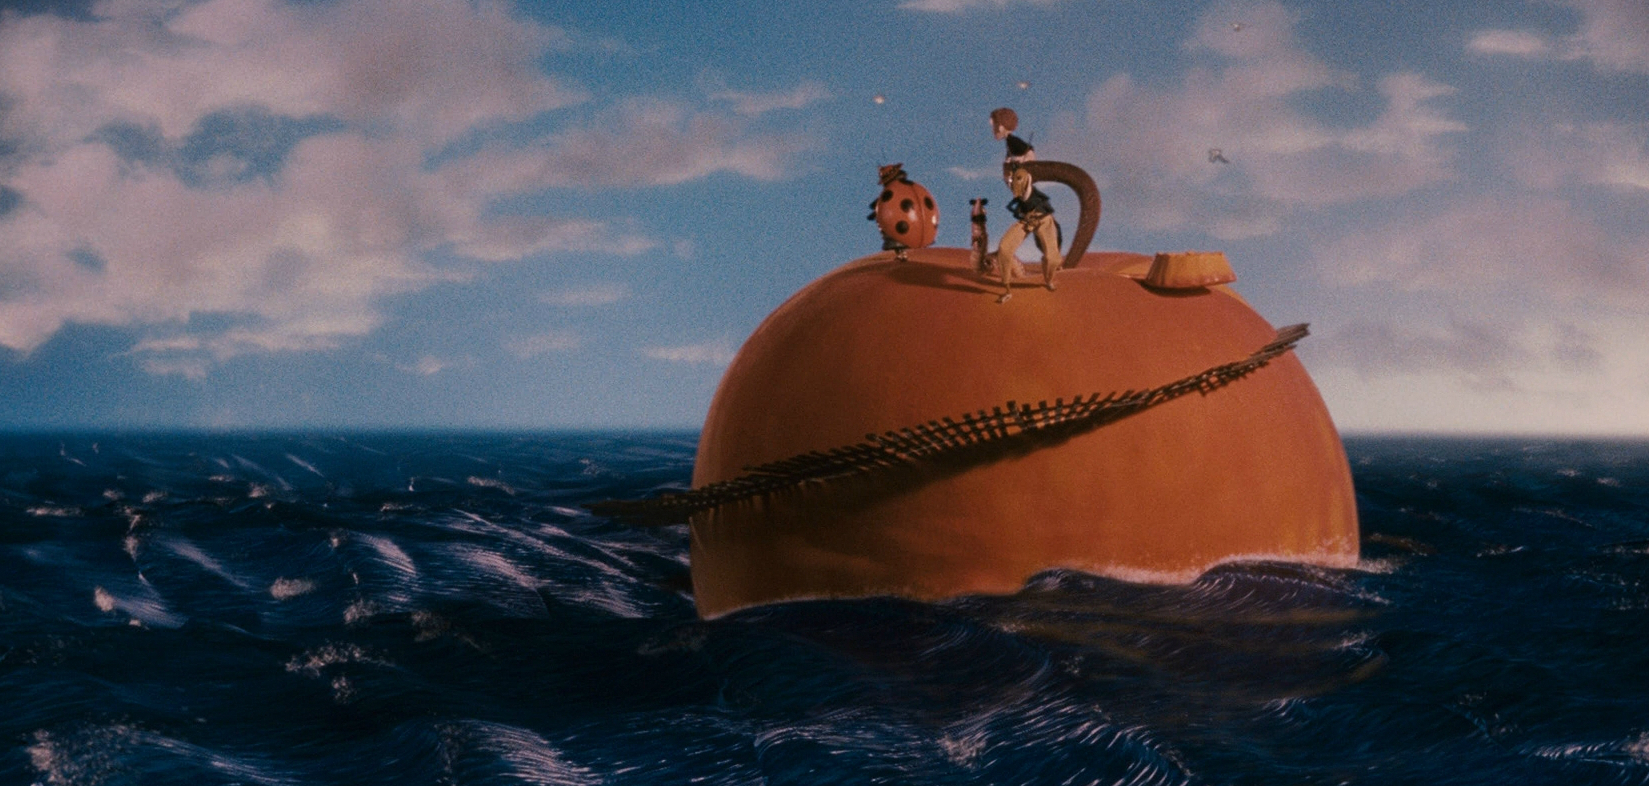 HQ James And The Giant Peach Wallpapers | File 1285.11Kb